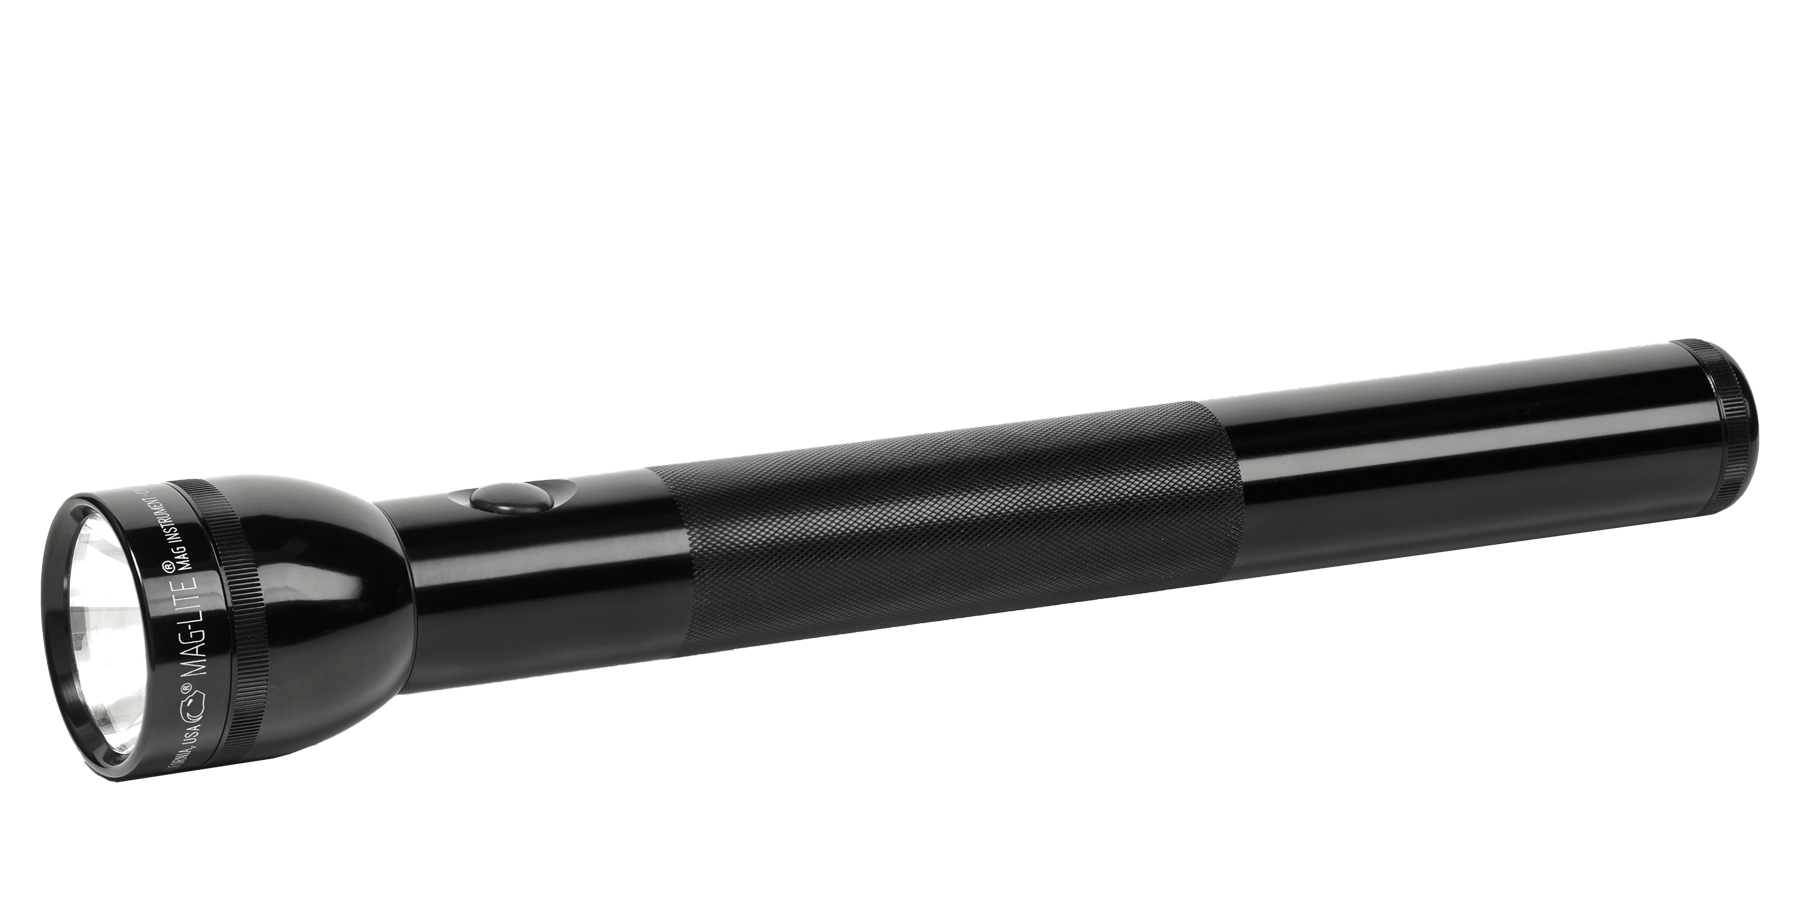 Maglite 4D Cell